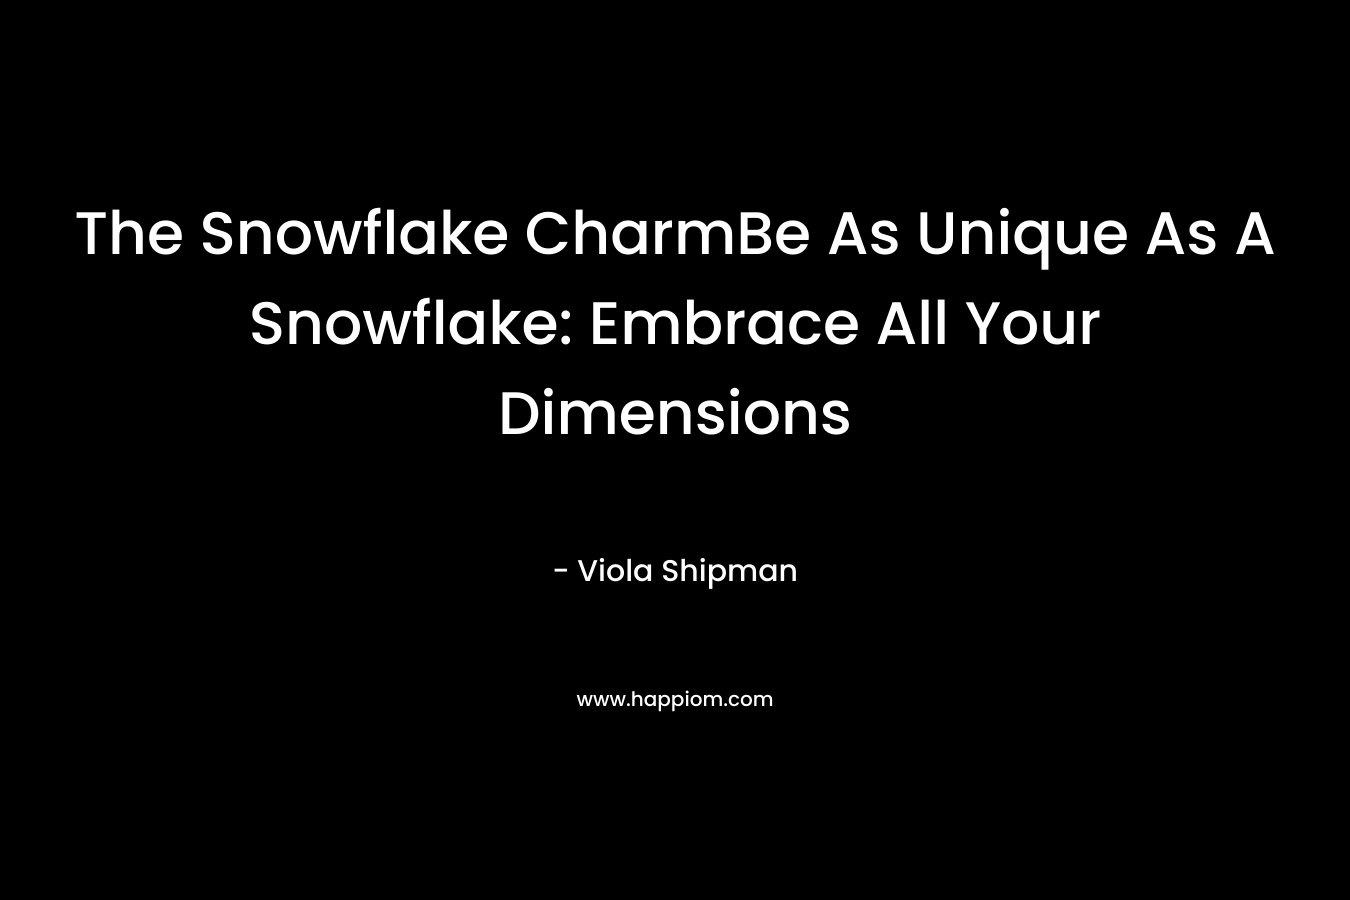 The Snowflake CharmBe As Unique As A Snowflake: Embrace All Your Dimensions